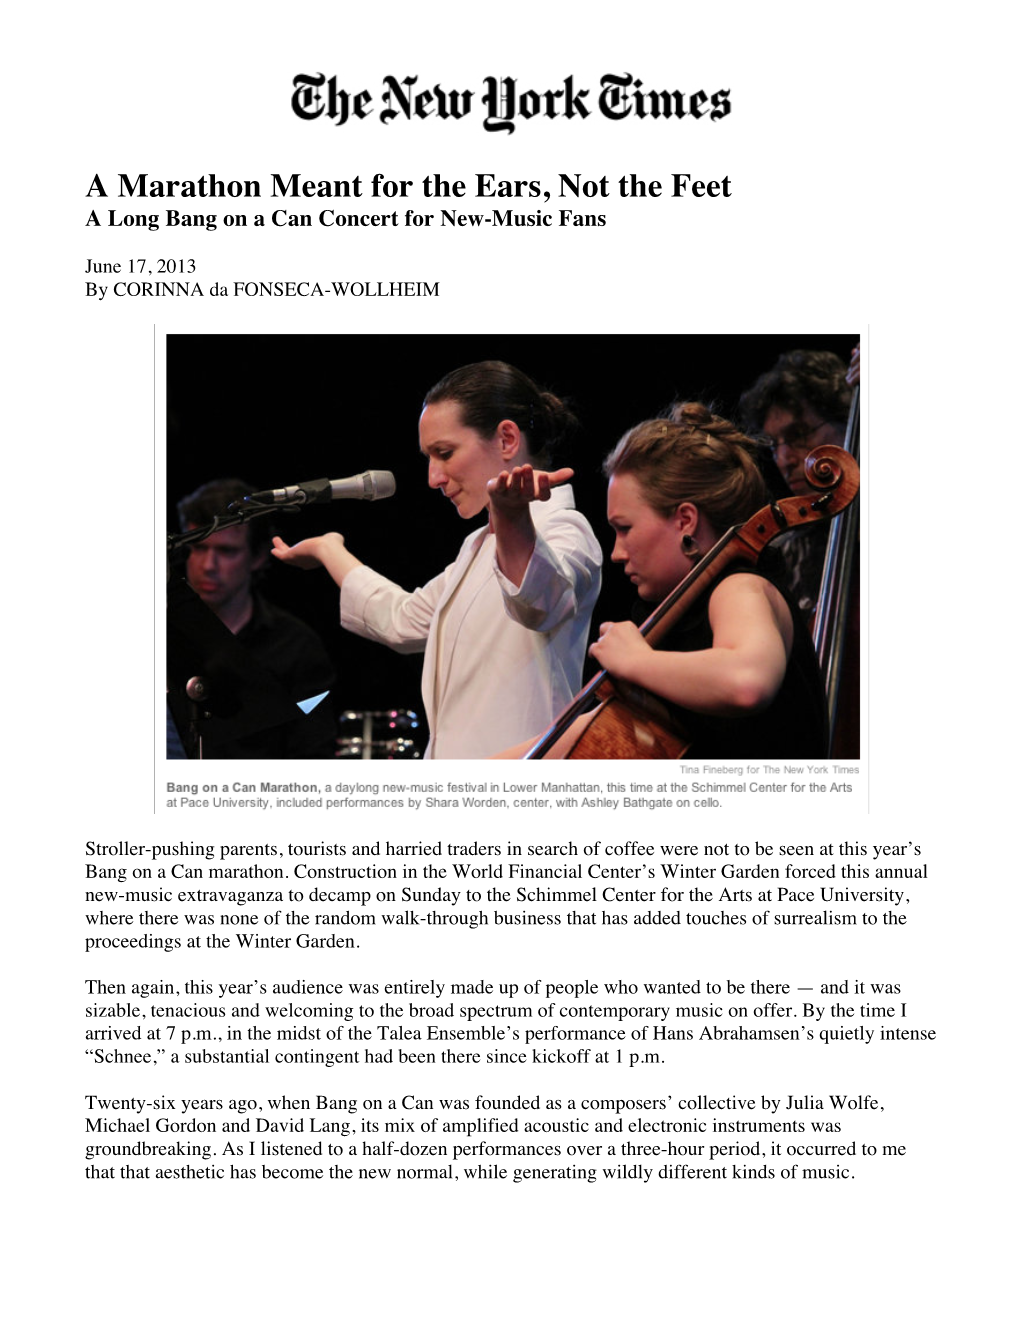 A Marathon Meant for the Ears, Not the Feet a Long Bang on a Can Concert for New-Music Fans